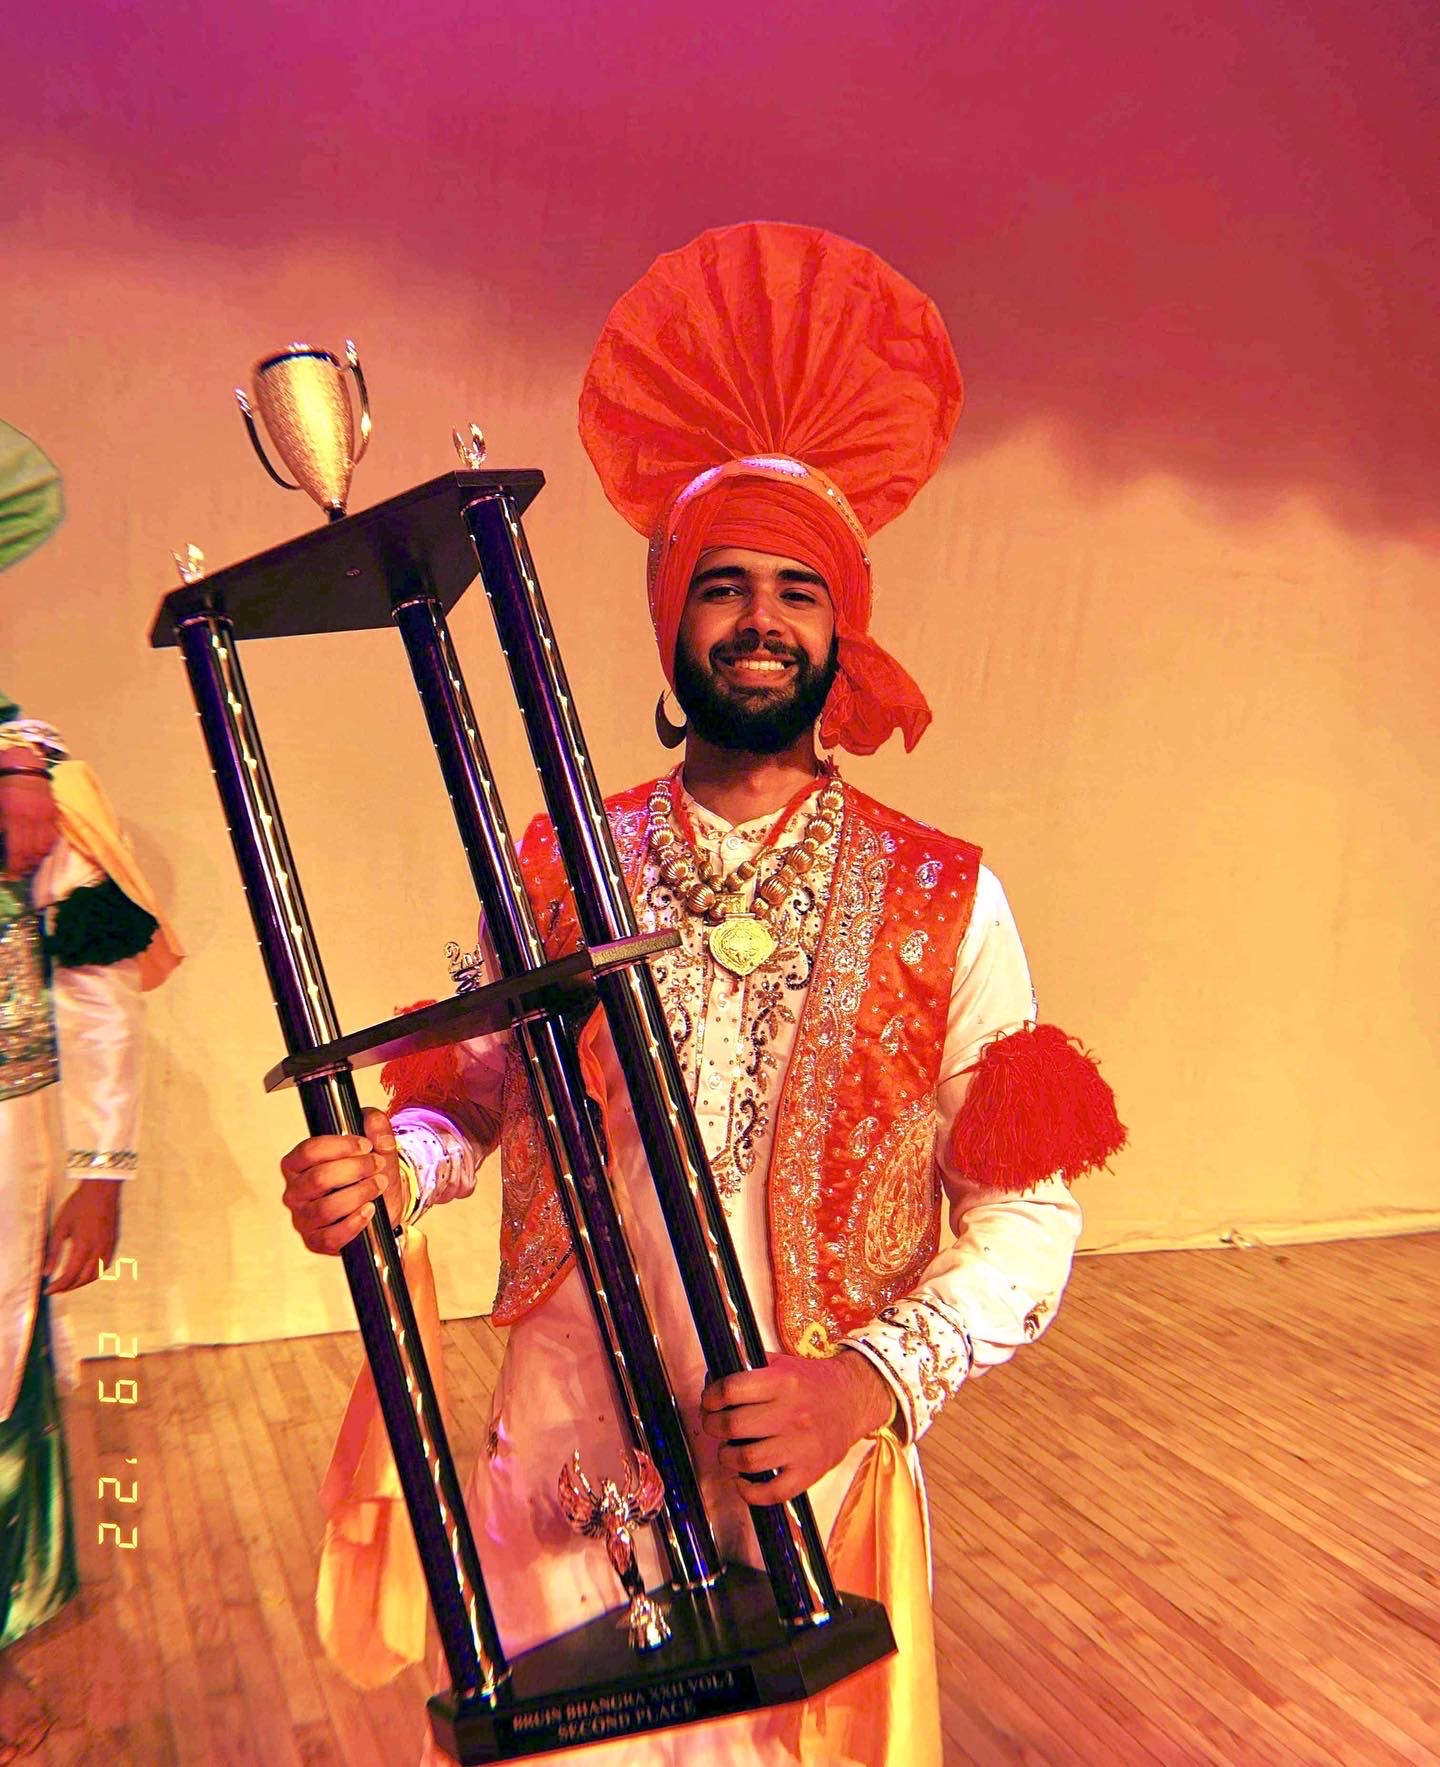  Aadi Sharma has competed in Bhangra dance competitions around the country and performed as a backup dancer for a Punjabi singer. 